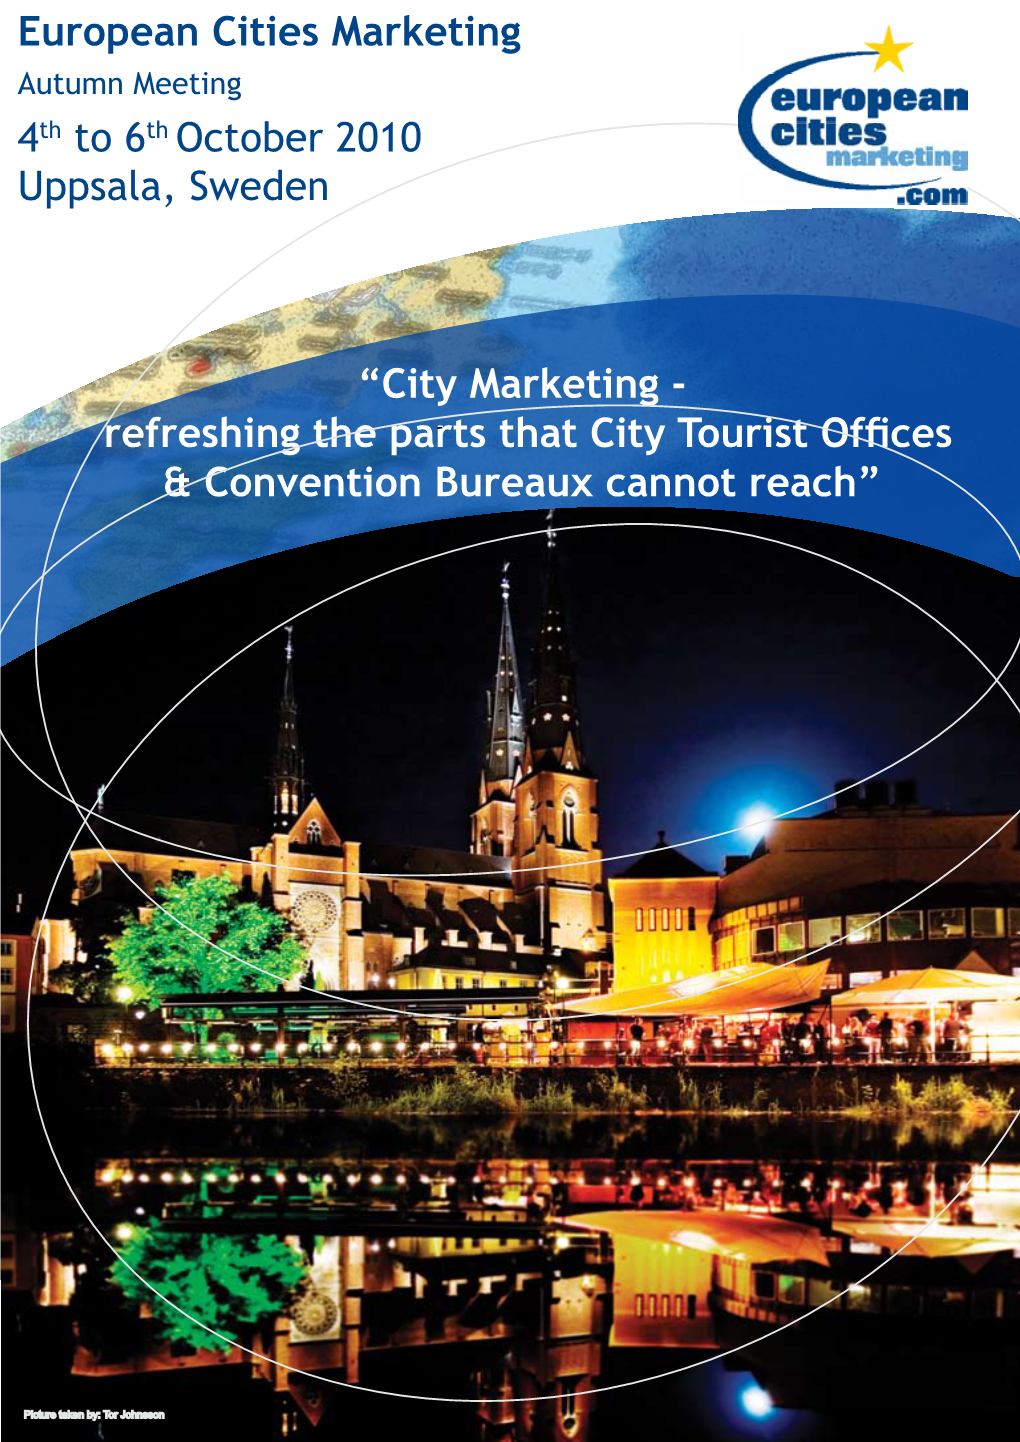 City Marketing - Refreshing the Parts - That City Tourist Offices & Convention Bureaux Cannot Reach” Dear Colleague